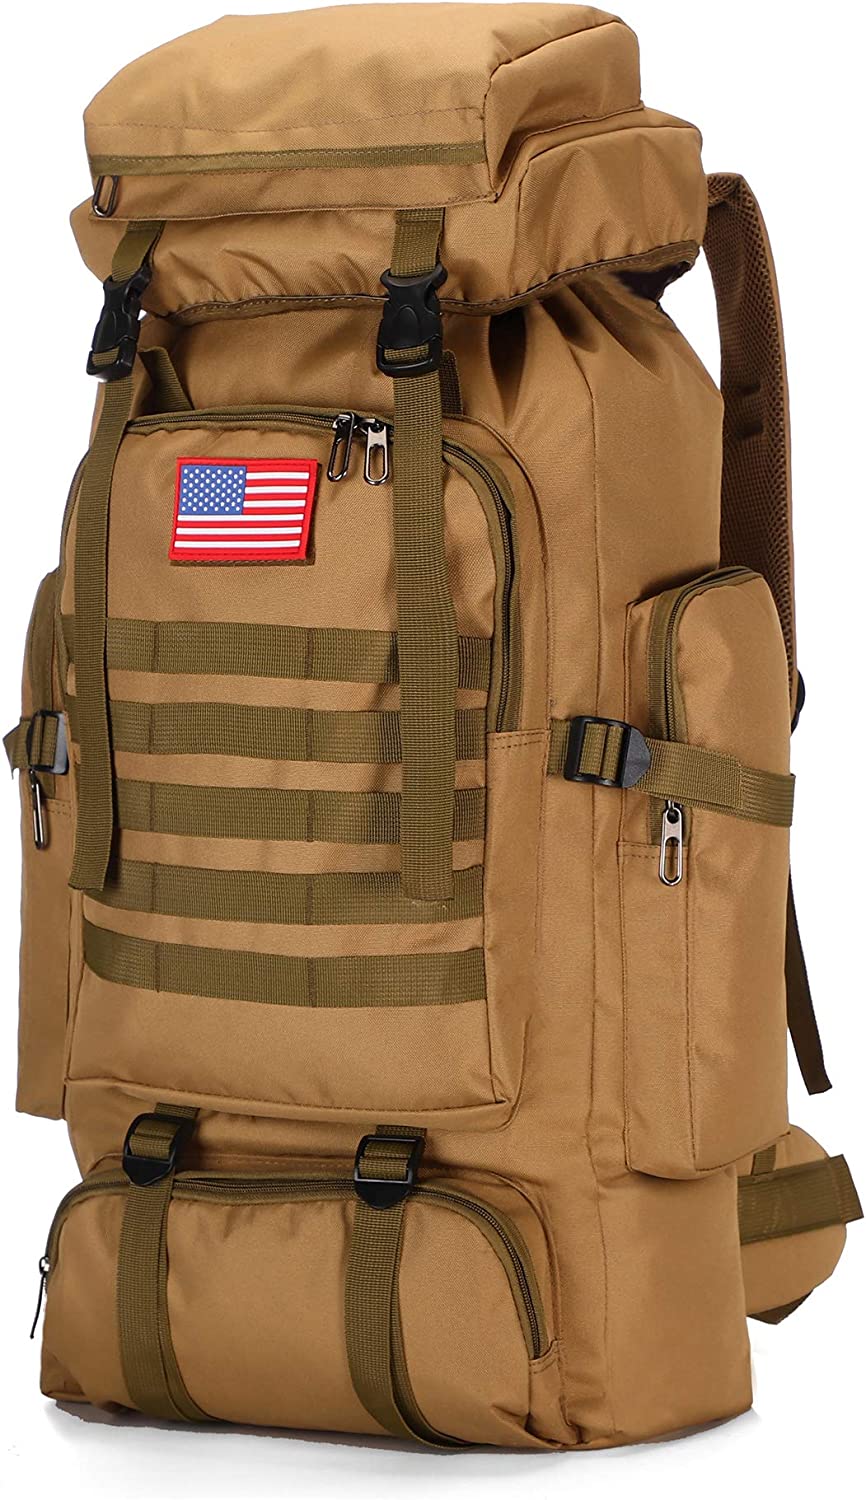 70L Camping Hiking Military Tactical Backpack Outdoor Sport Bags